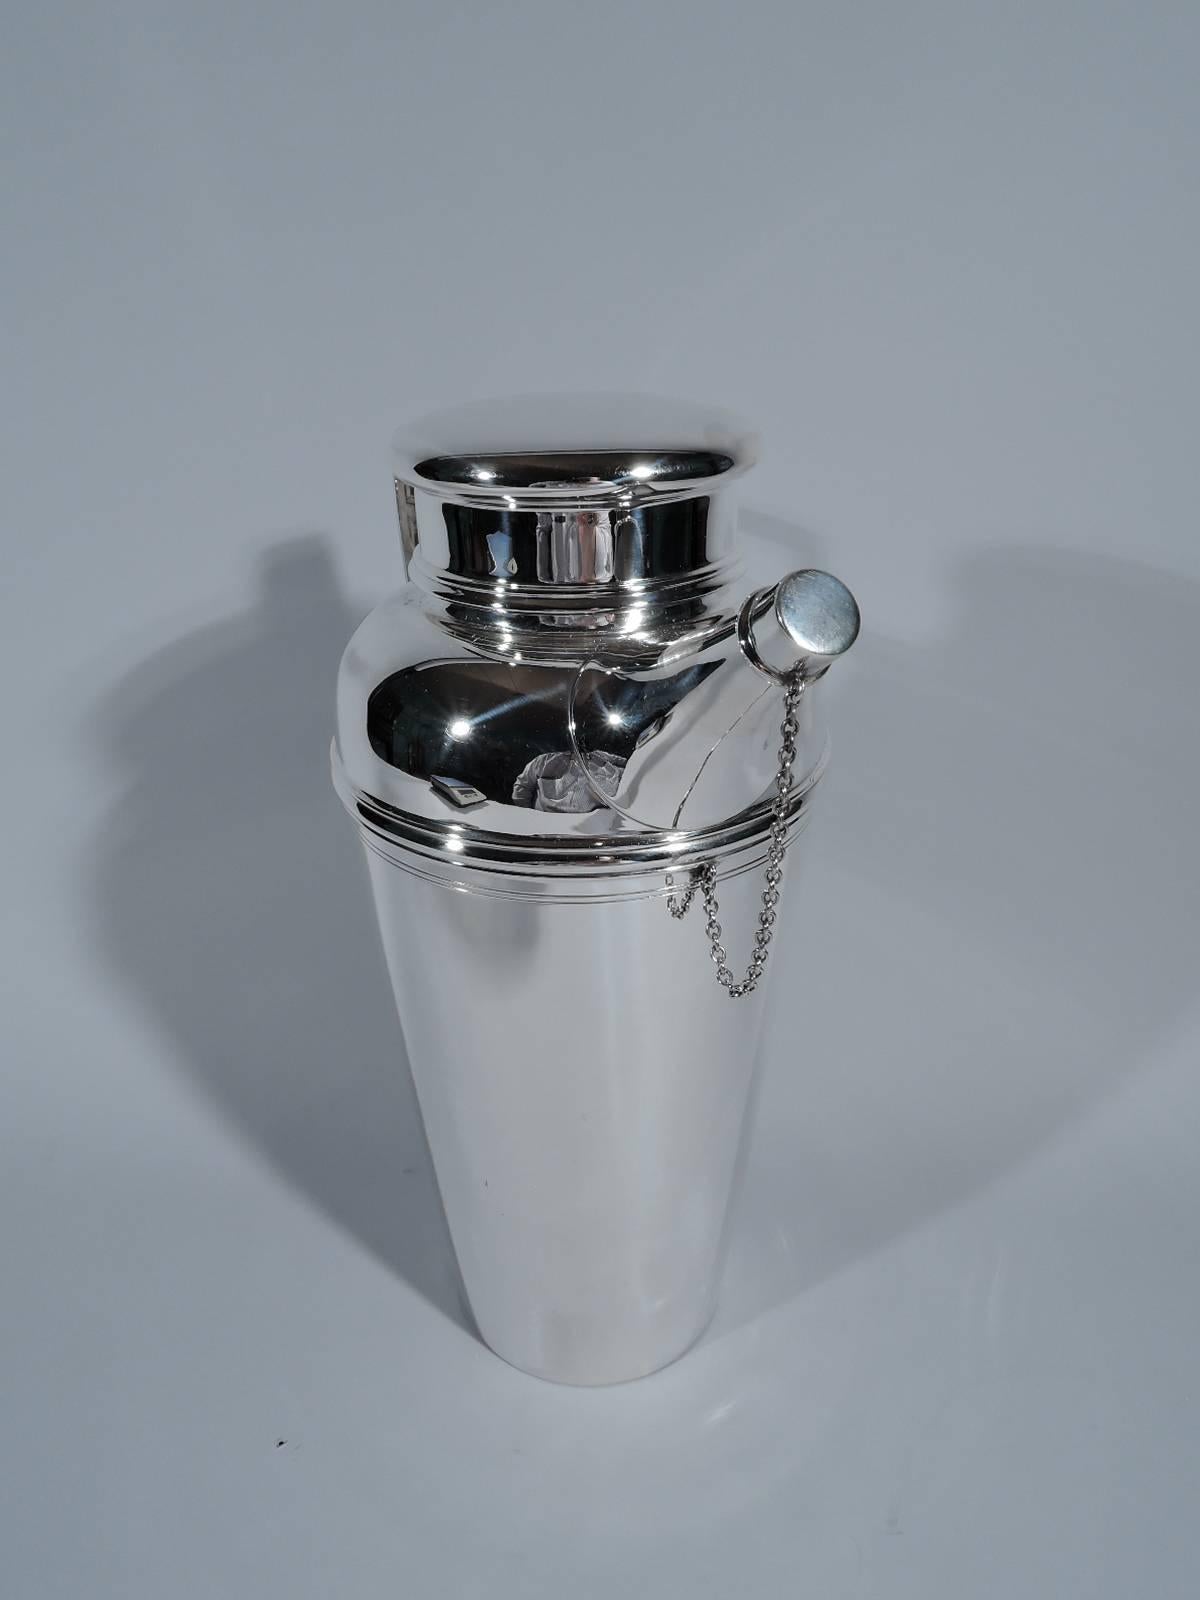 Party-size sterling silver cocktail Shaker. Made by Tiffany & Co. in New York, circa 1929. Tapering bowl, scrolled-bracket handle, diagonal spout with built-in strainer and chained cap, and short neck with bun cover. Holds four pints. Hallmark